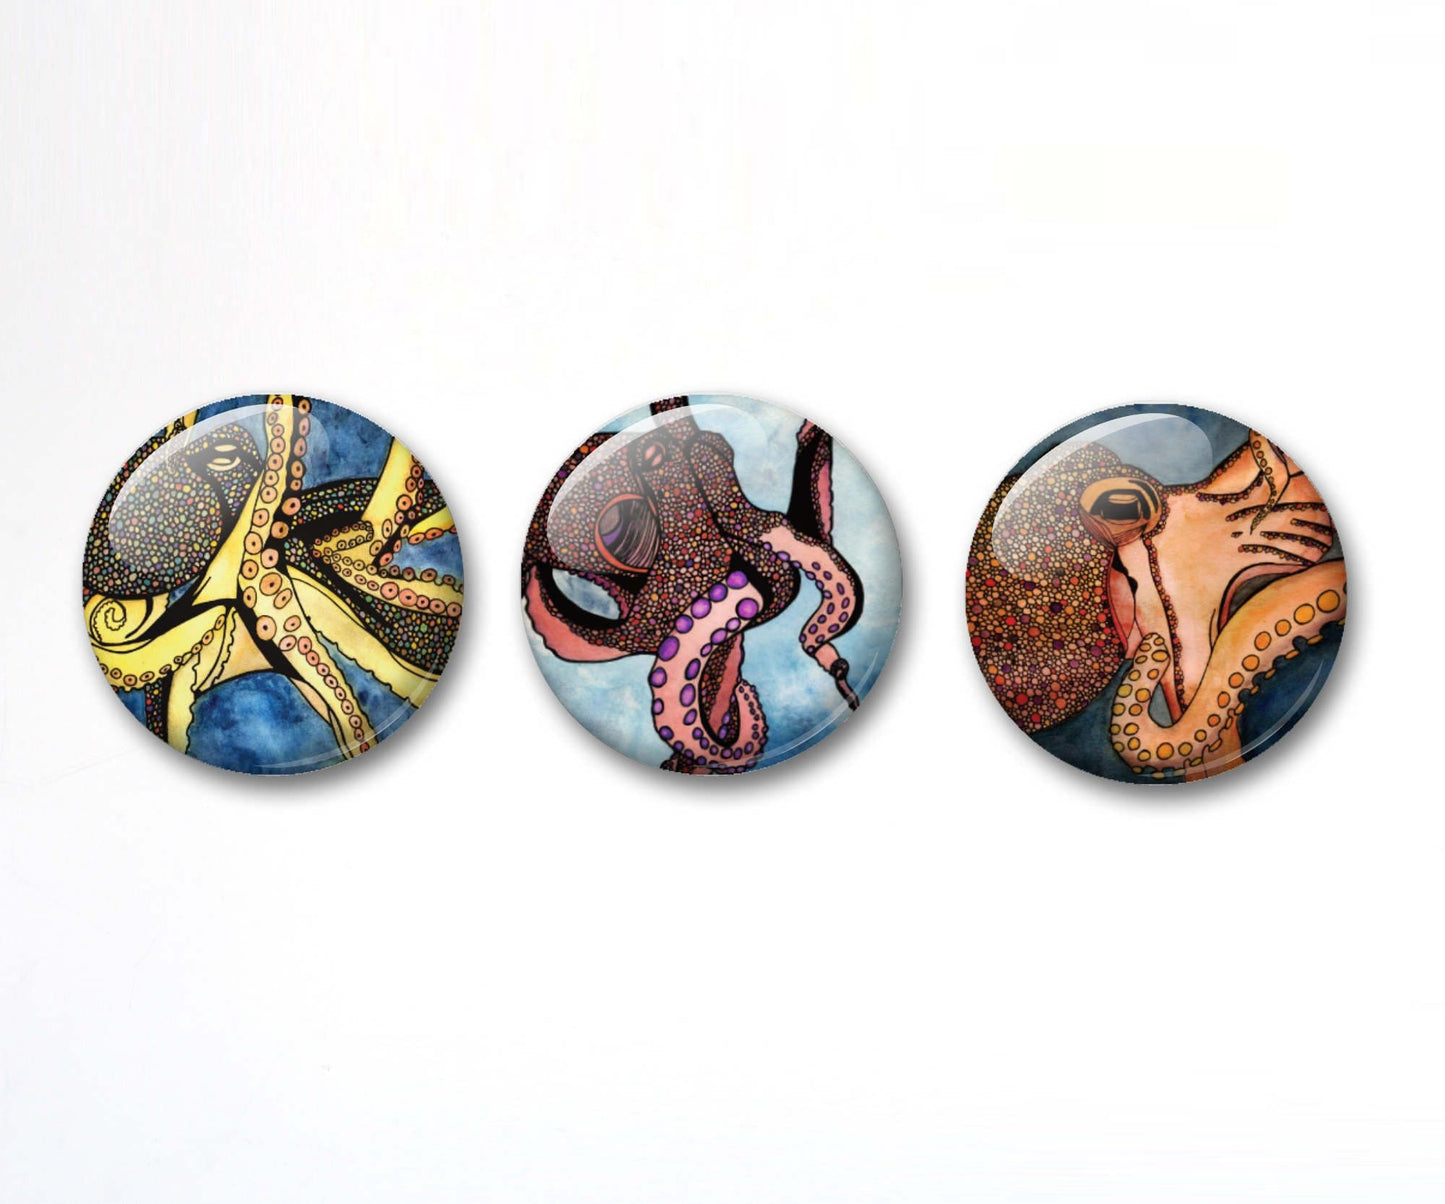 PinkPolish Design Buttons "Adventurous Octopus" Button Pack - 3-Pack Pin Back Button, 1 Inch